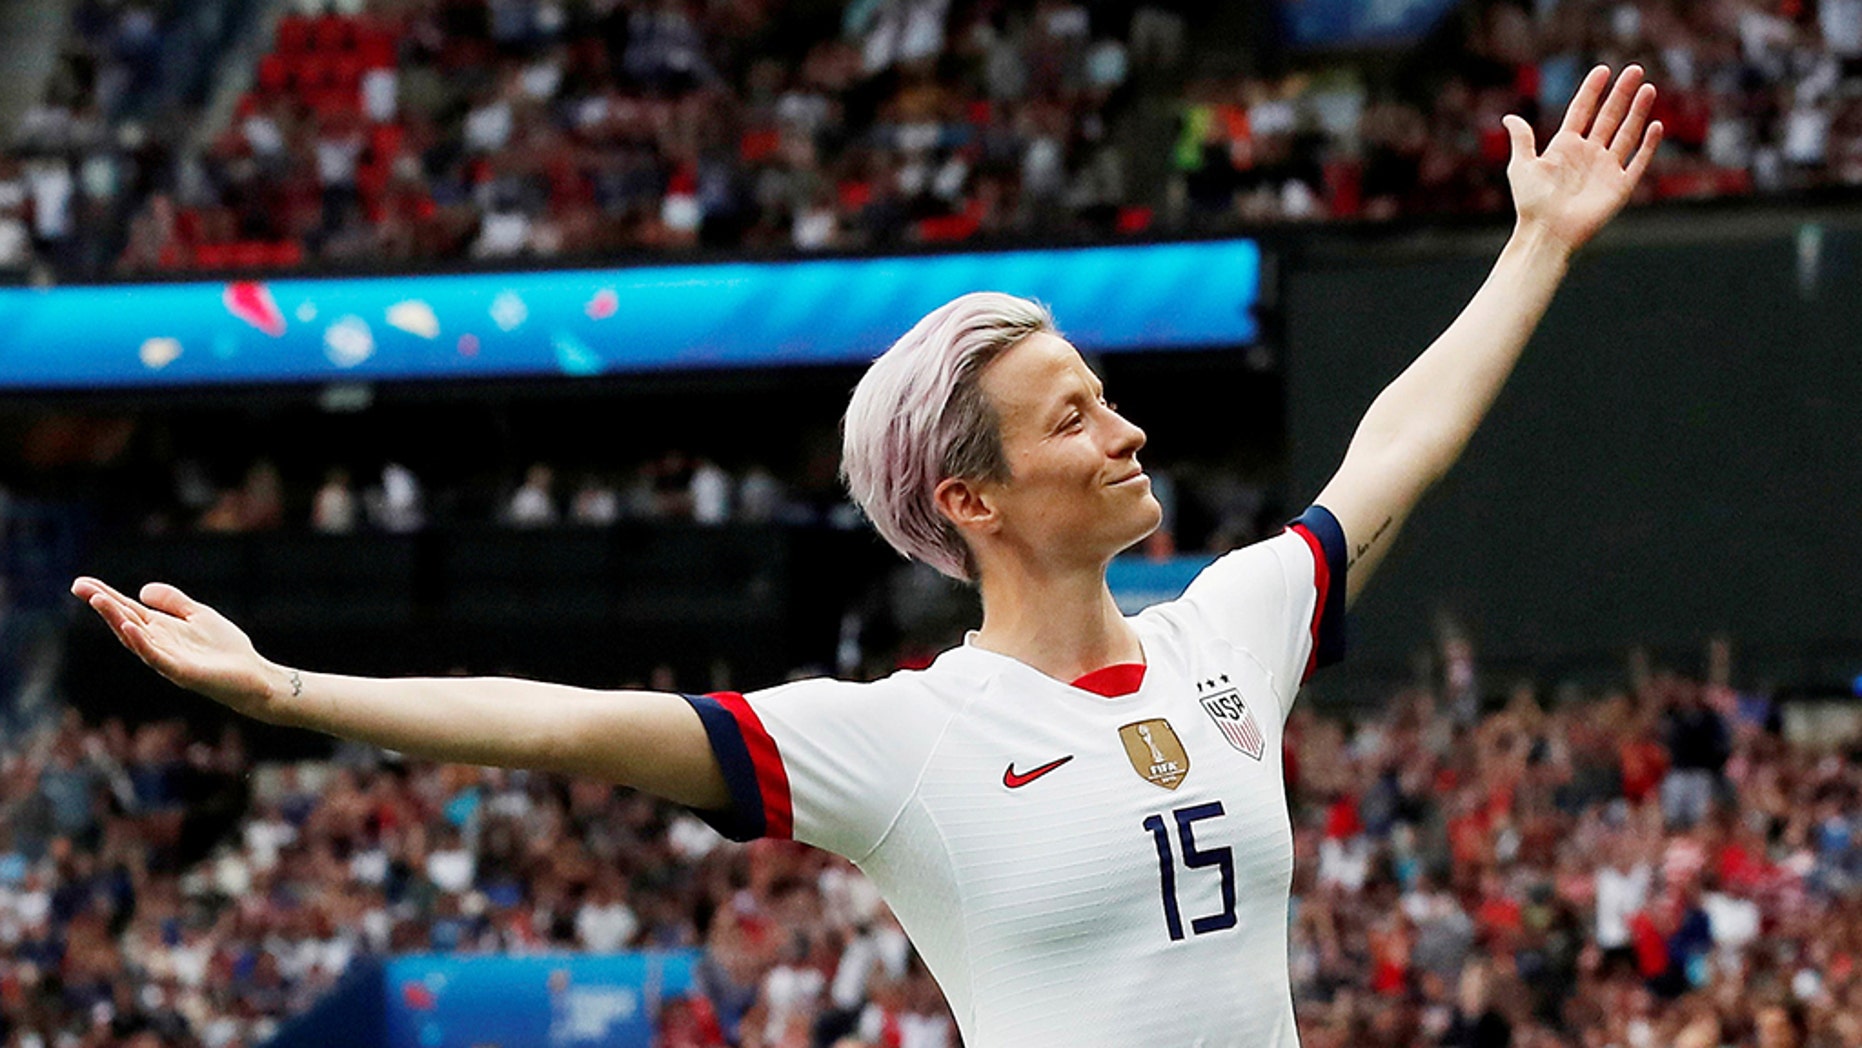 10. Megan Rapinoe's Blue Hair: A Reflection of Her Fearless and Unapologetic Personality - wide 1